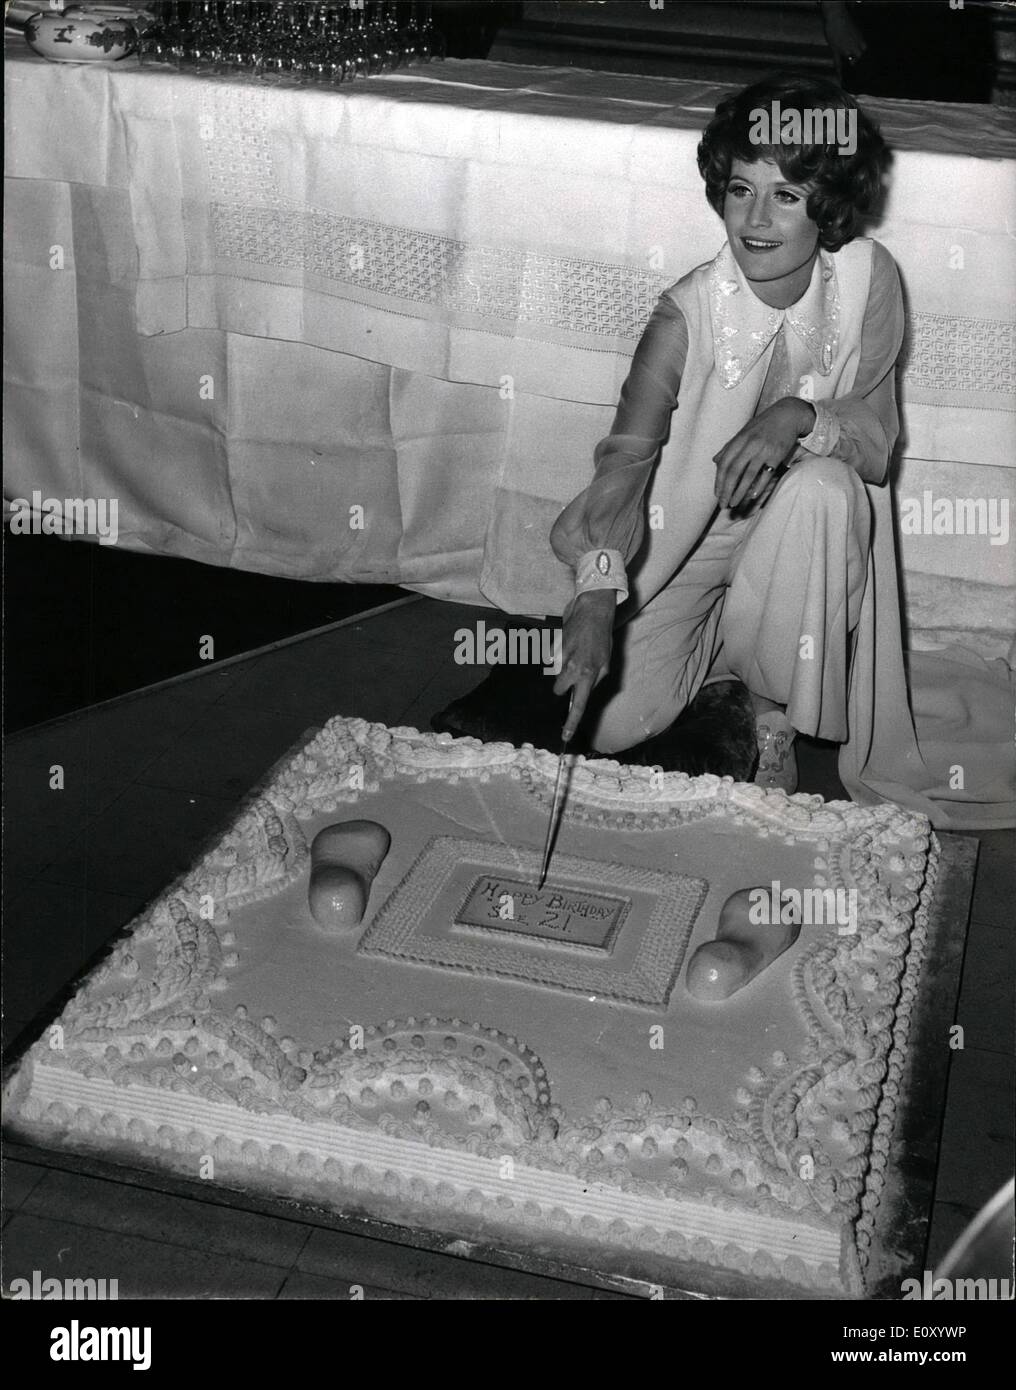 Feb. 02, 1968 - Sandie Shaw Holds 21st Birthday Party at Madame Tussauds: Singer Sandie Shaw celebrated her 21st. birthday at midnight a party in the Chamber of Horrors at Madame Tussauds. In recognitions of her now celebrated barefoot style of singing, her birthday cake was decorated with barefoot in icing. Sandie hired the Chamber of Horrors at Madame Tussauds for 500 guineas, and invited her guests to mingle with the life like effigies of Heath, Haigh and Crippen.Photo Shows Sandie Shaw cut her Birthday cake at Madame Tussauds. Stock Photo